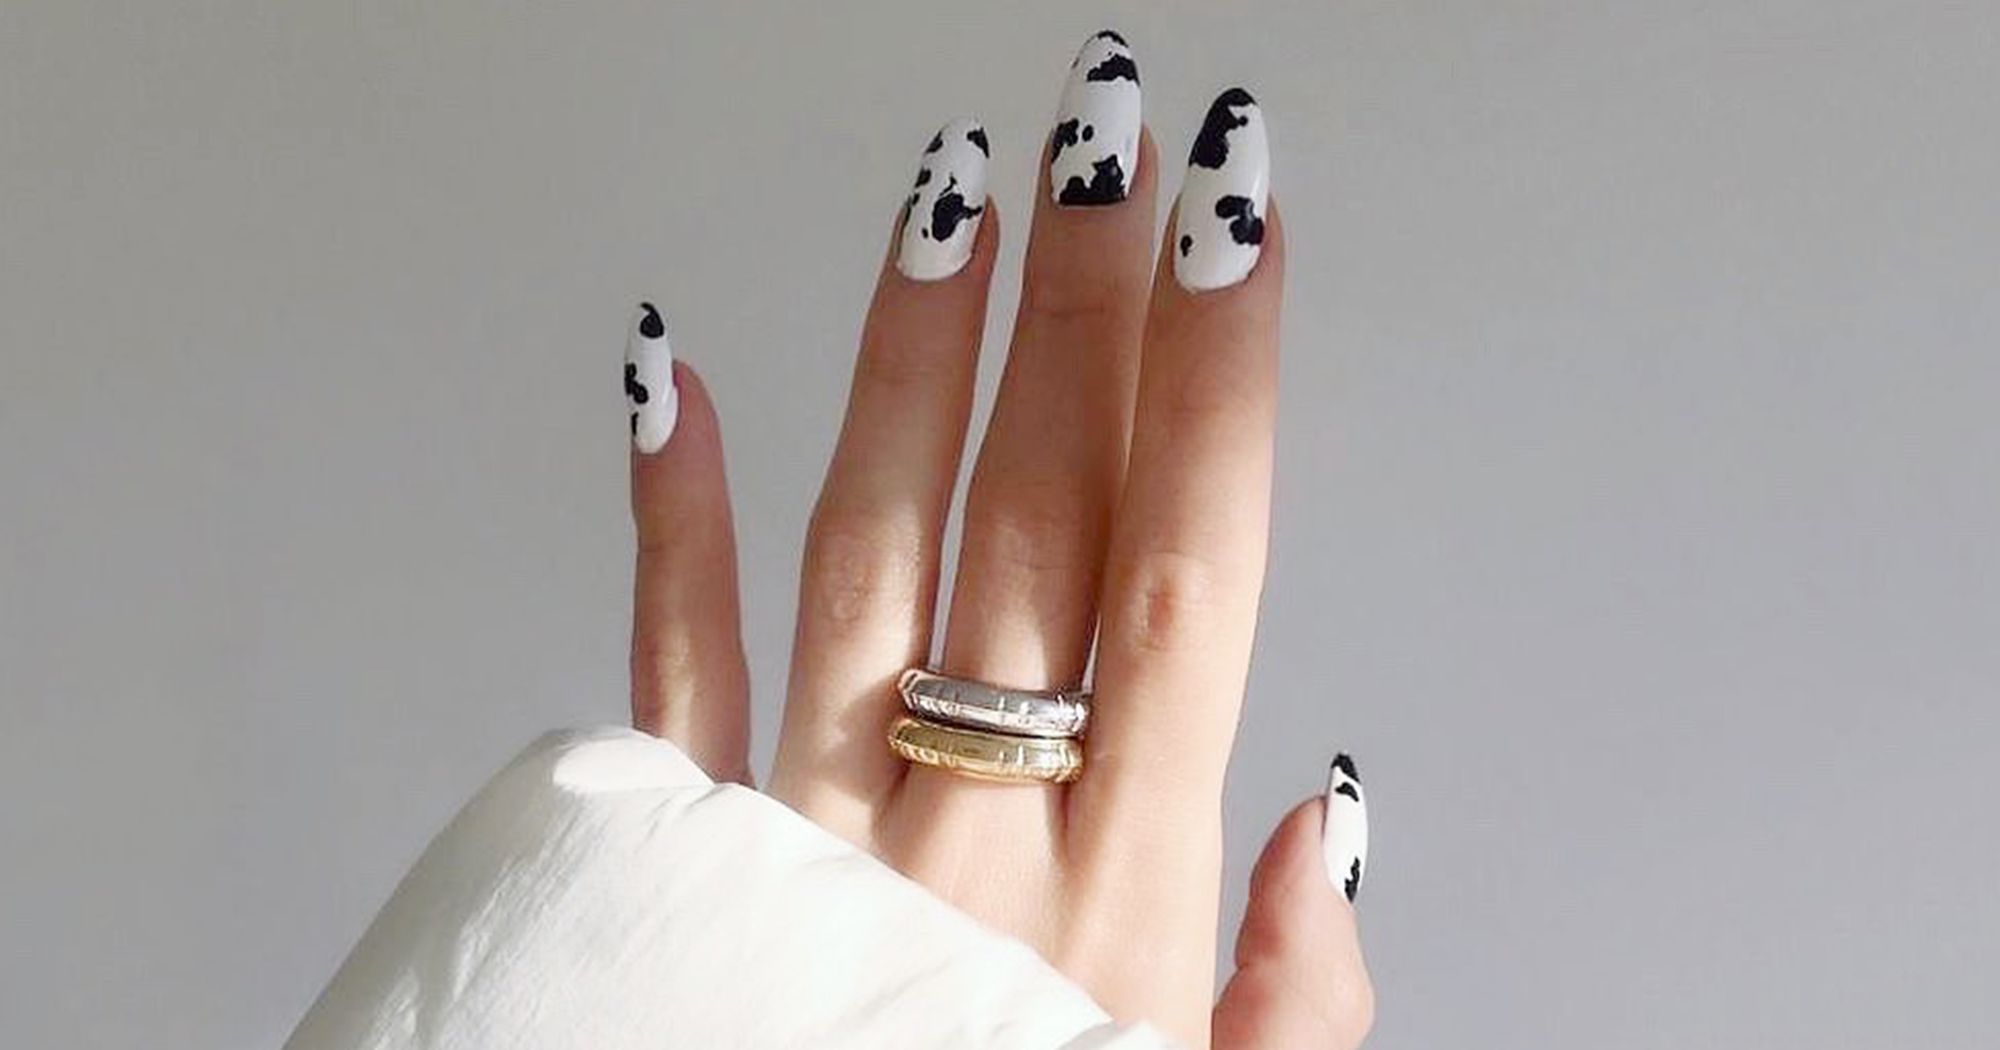 Abstract cow print nails – Scratch